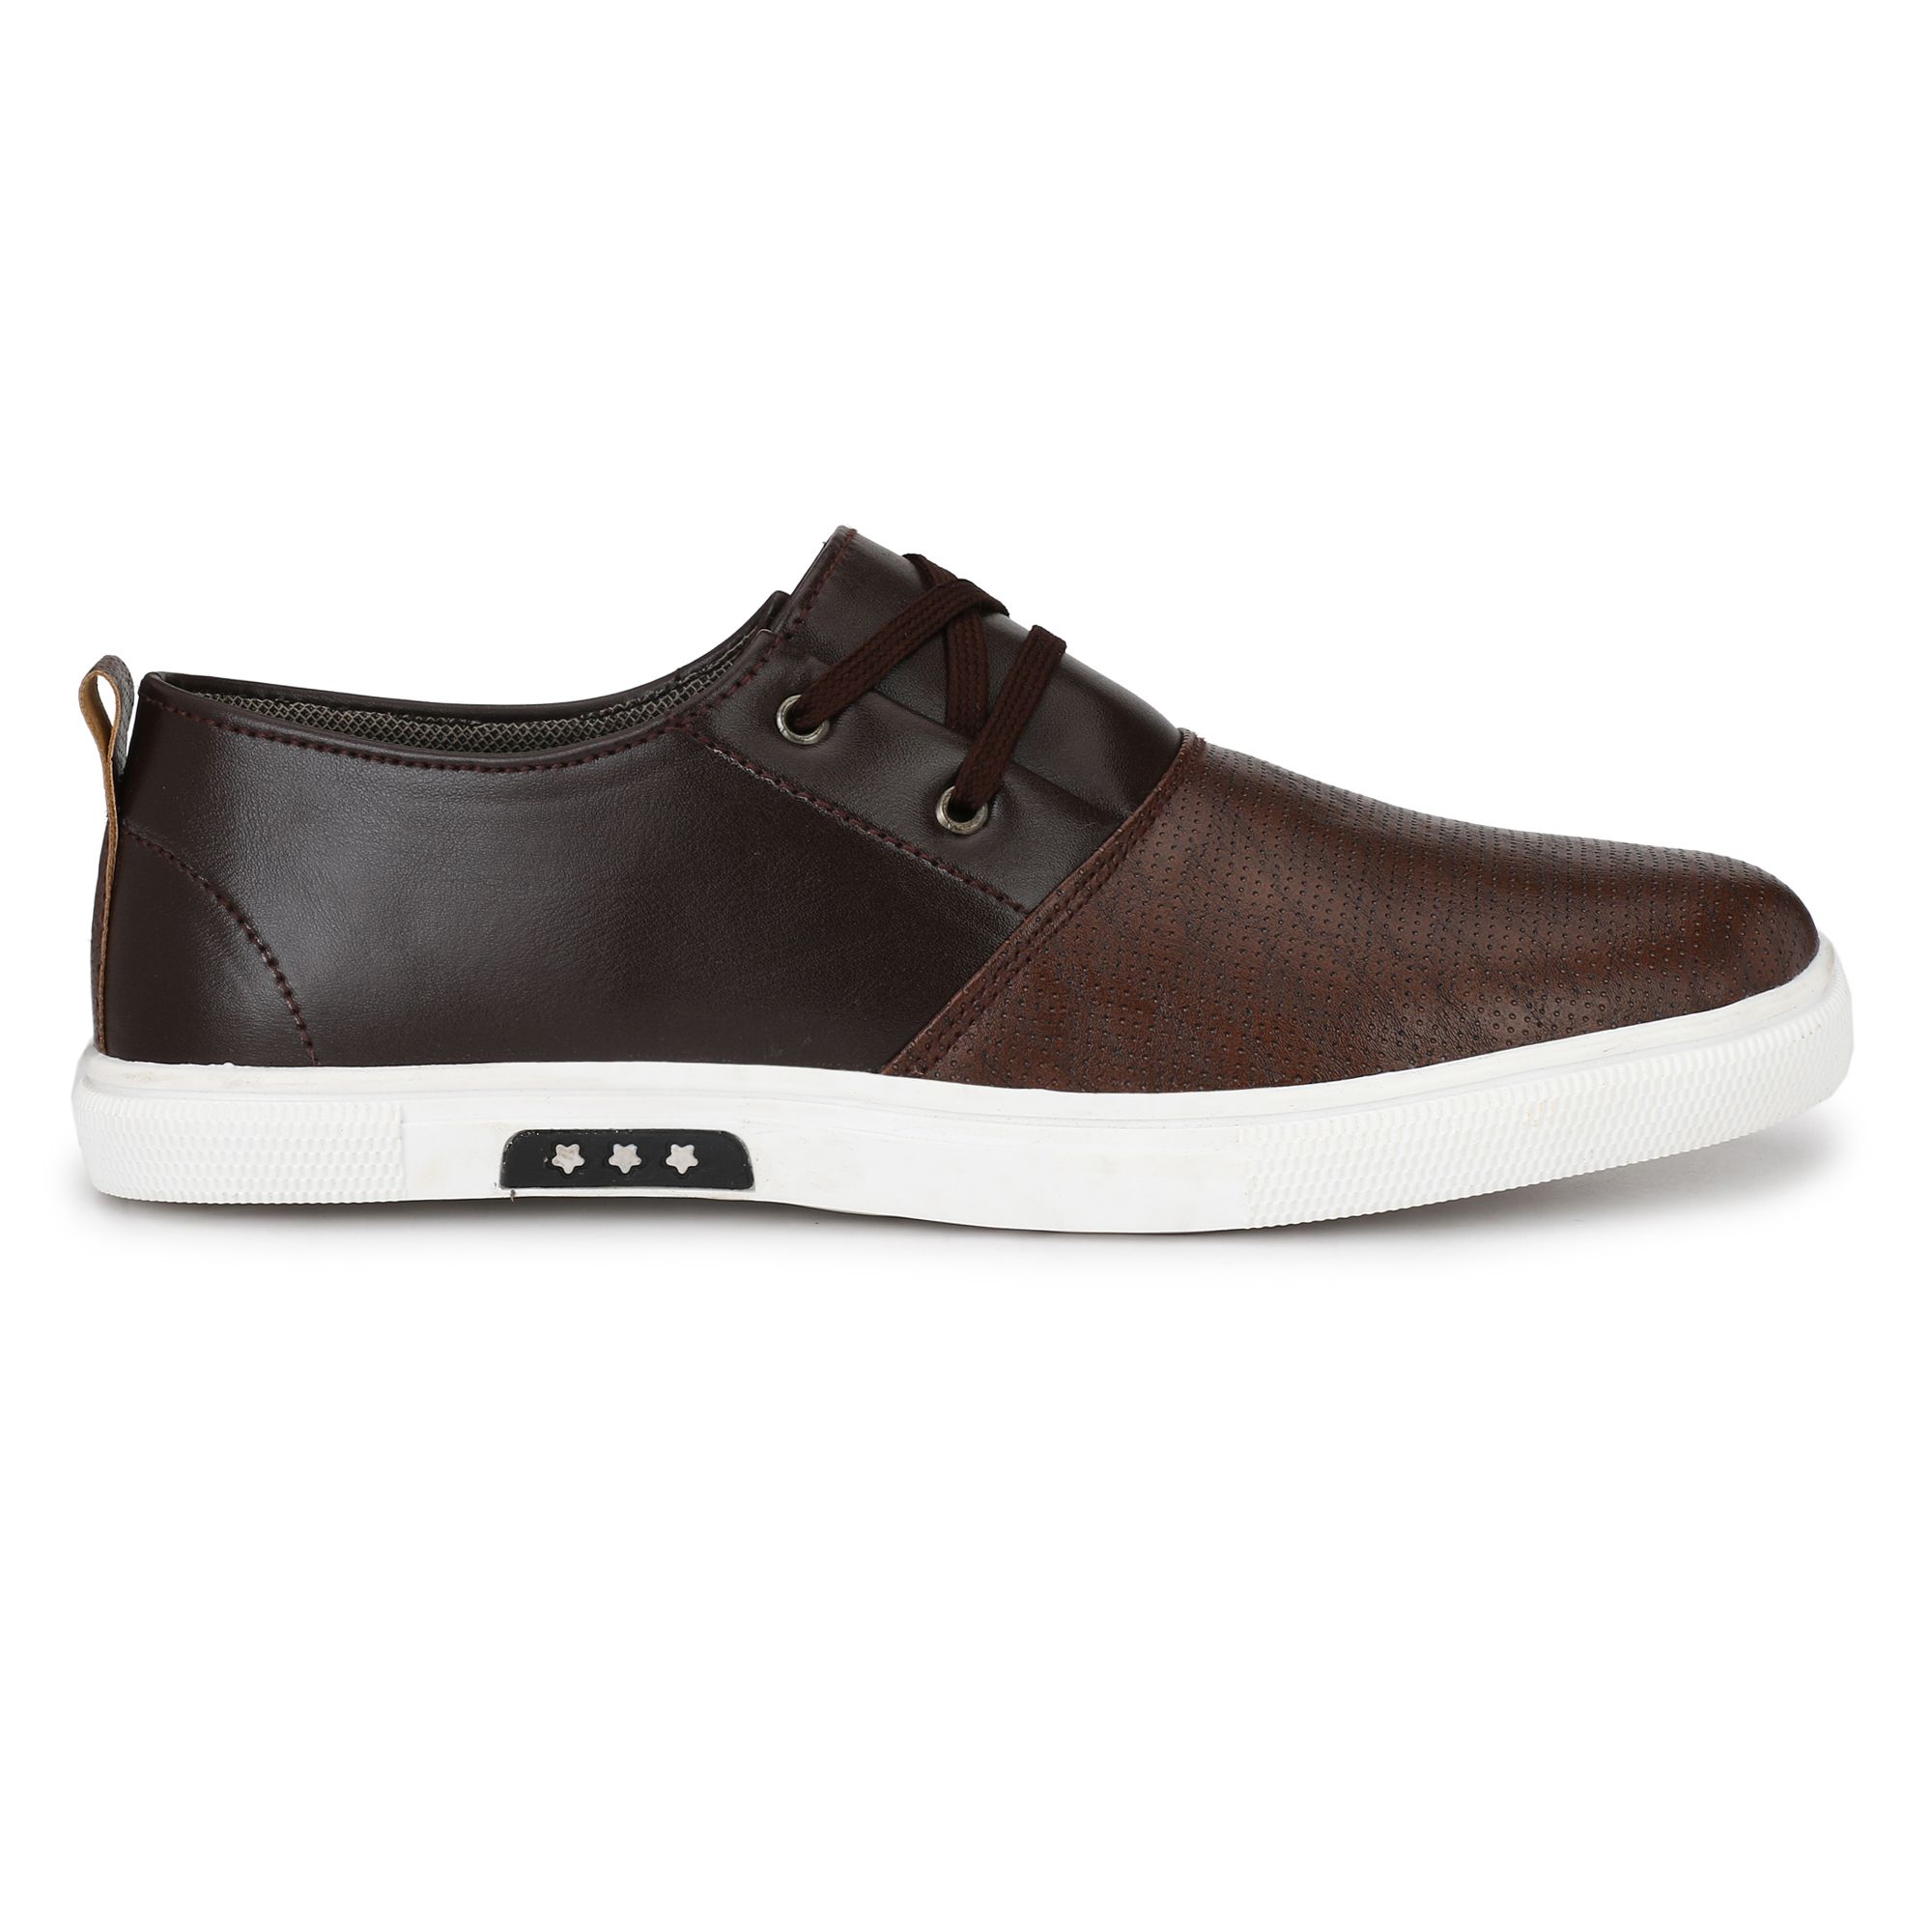 0103 Sneakers Brown Casual Shoes 